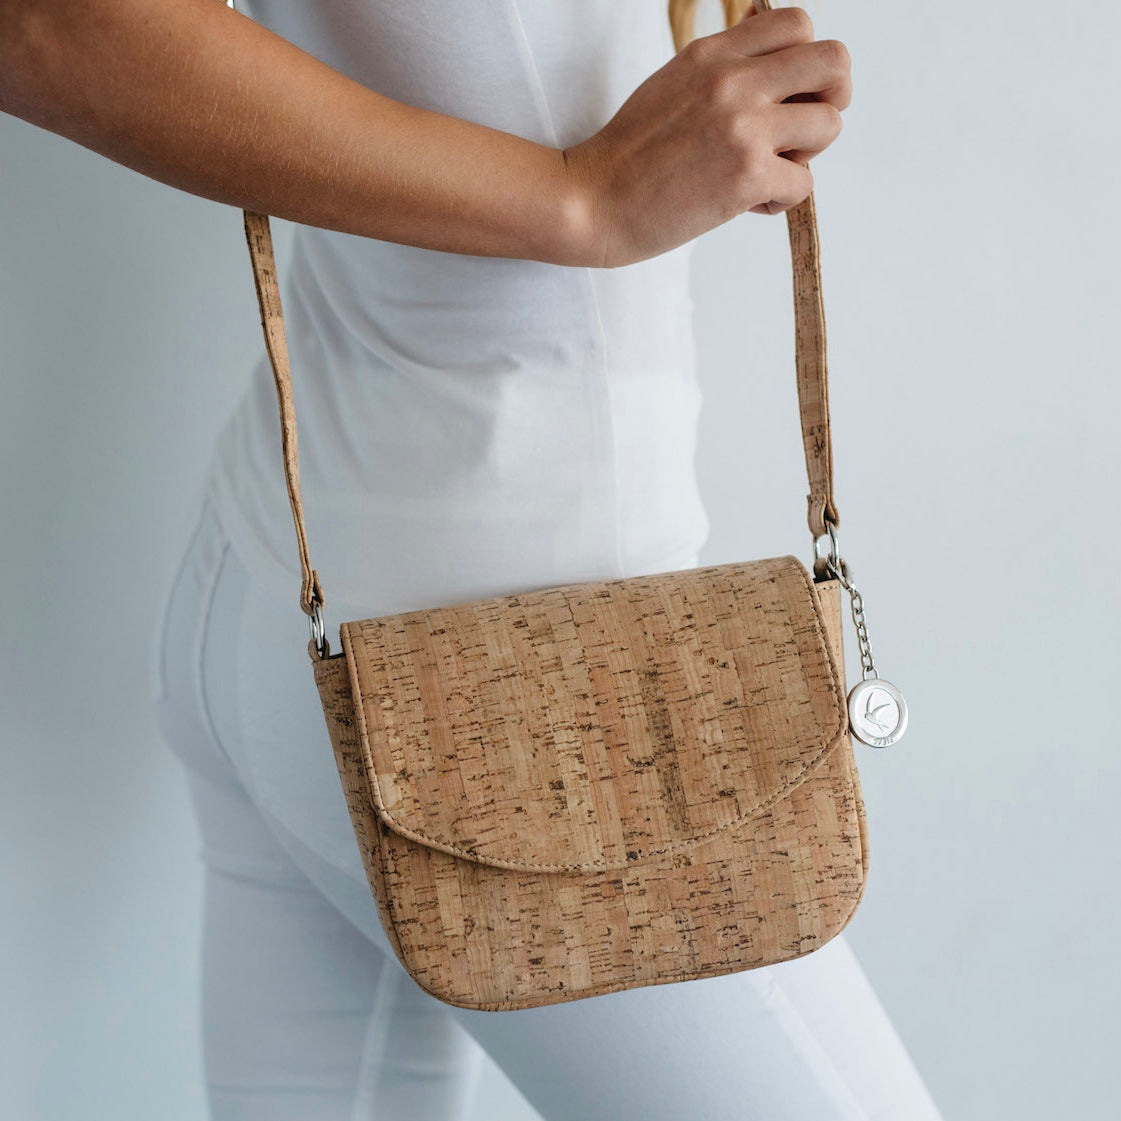 Vegan Cork Handbags, Wallets and Purses Made in Portugal – We Are Portugal